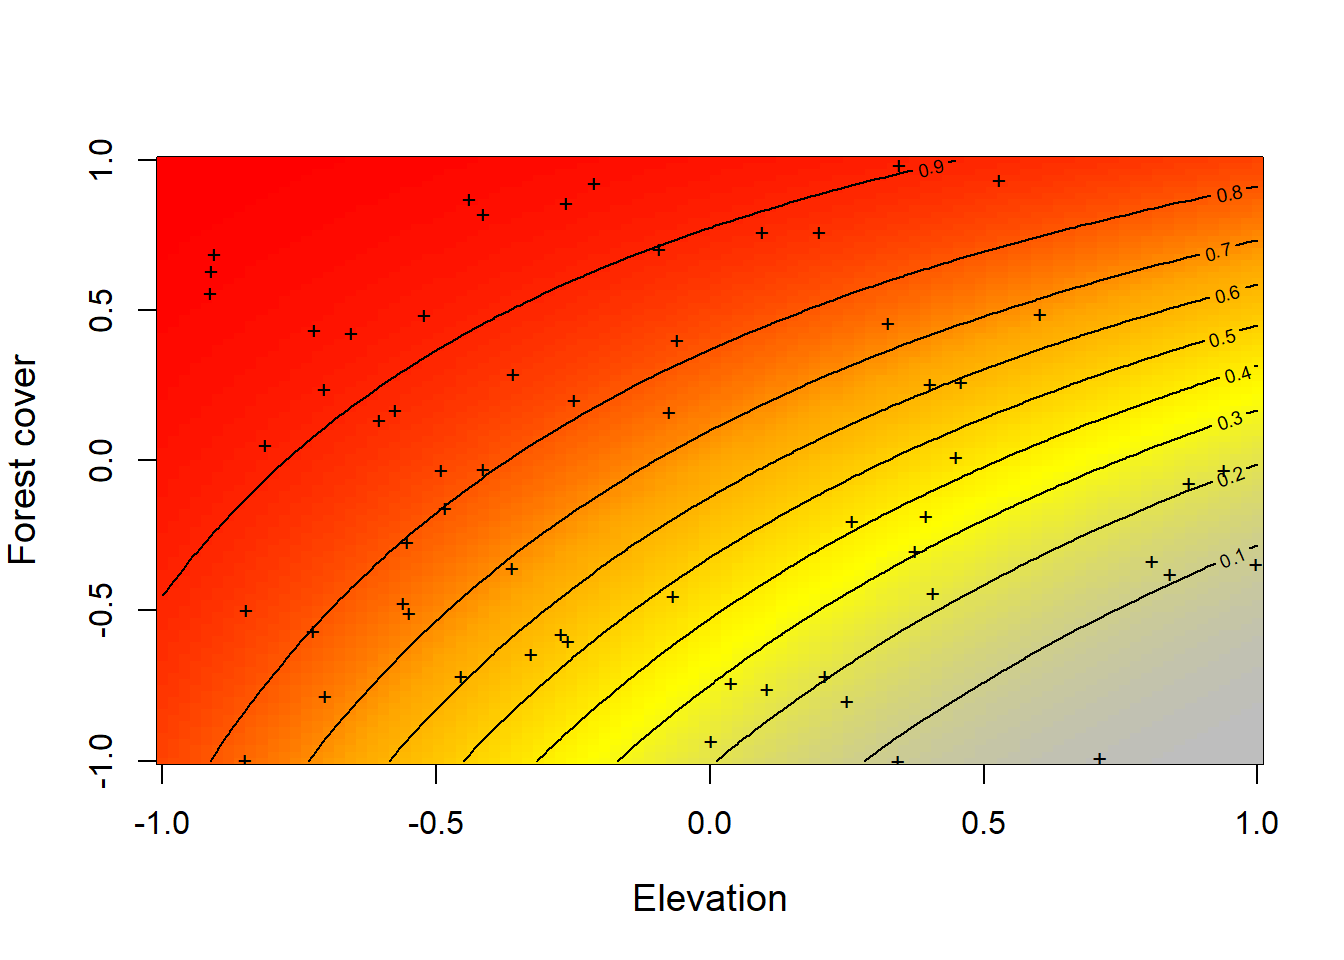 Relationship constructed between the simulated data of the expected occurrence (occupation) of tapir (psi) represented with the color scale from gray to red, against elevation and forest cover simultaneously. In this case the interaction between the two covariates is given by the value of beta3 = 1 that we have established previously.